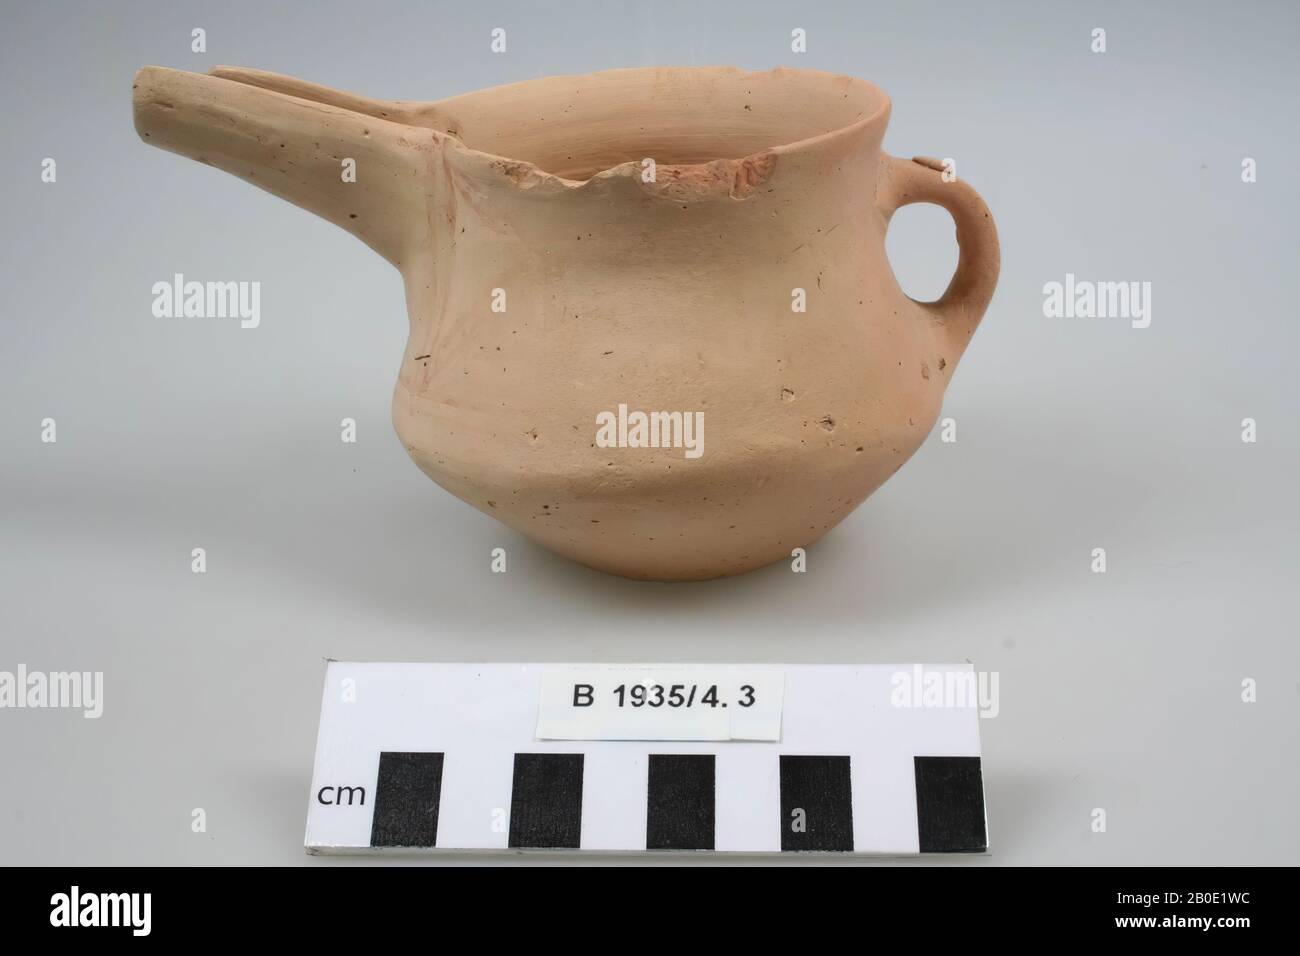 A beak bowl with wide neck opening and open wide spout decorated with lines and points on the upper part of the outer edge, inside a division into two compartments in which triangle patterns., Crockery, earthenware, H 10.1 cm, D 11.1 cm, B incl. ear and spout 16.9 cm, D neck 9 cm, Iron Age III 800-700 BC, Iran Stock Photo